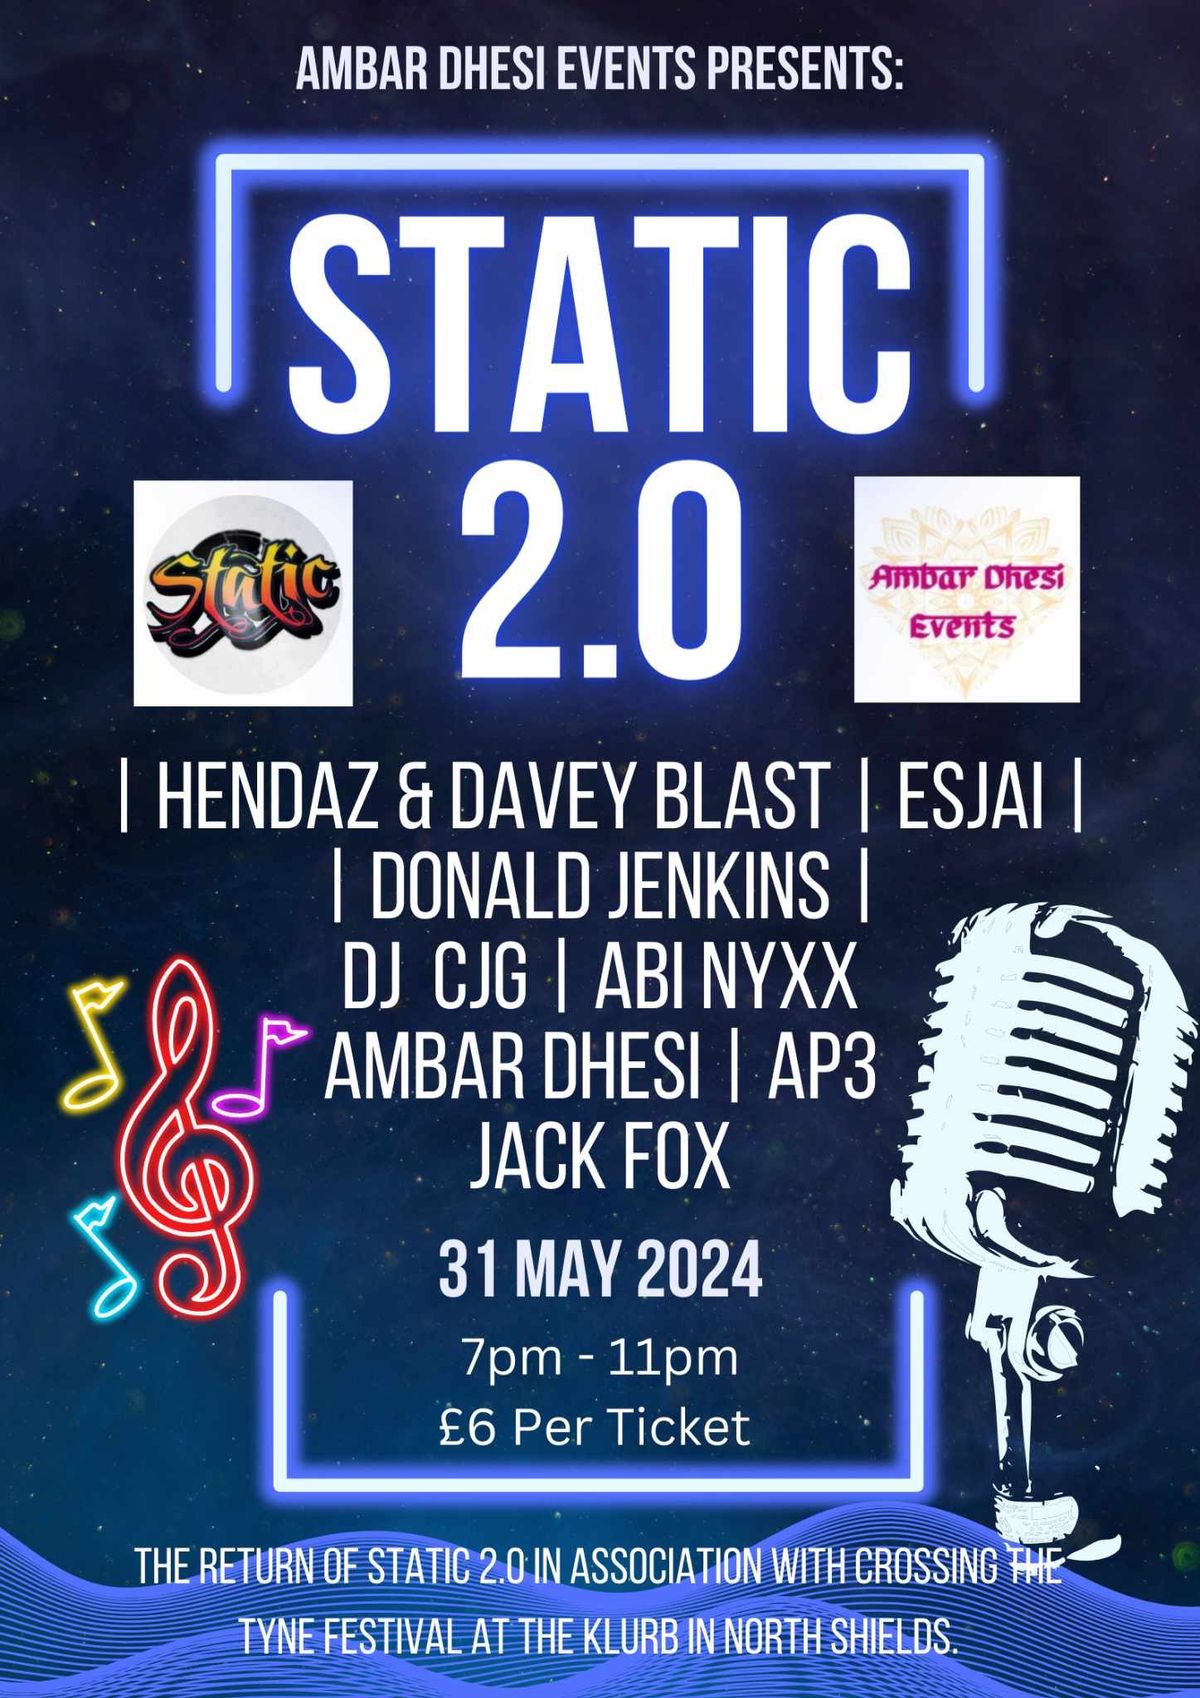 Ambar Dhesi Events Presents: The return of static 2.0 In association with with Across the Tyne Fest